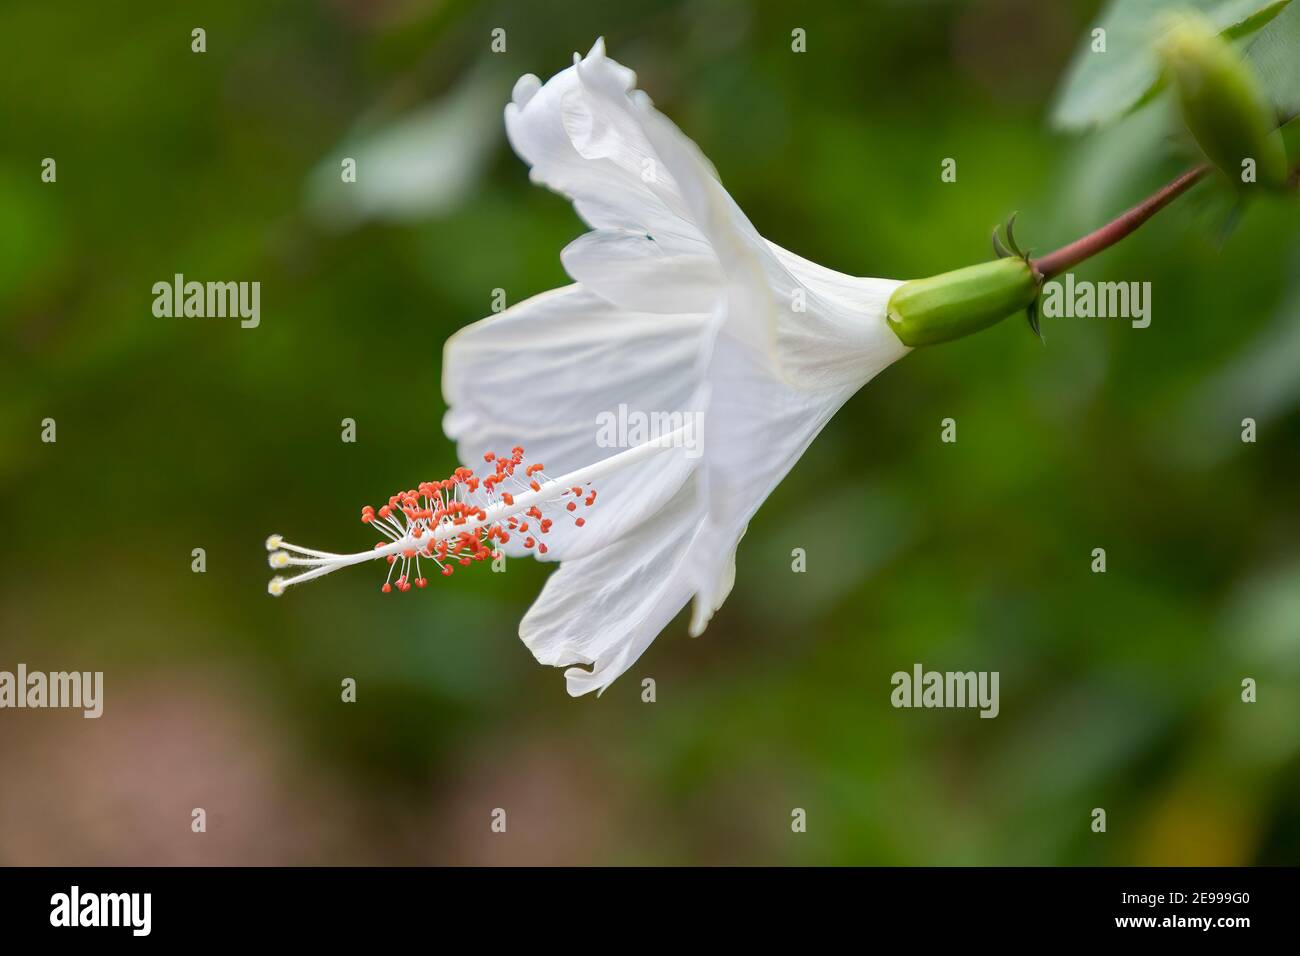 White hibiscus flower showing stamen and anthers, Gibraltar Stock Photo